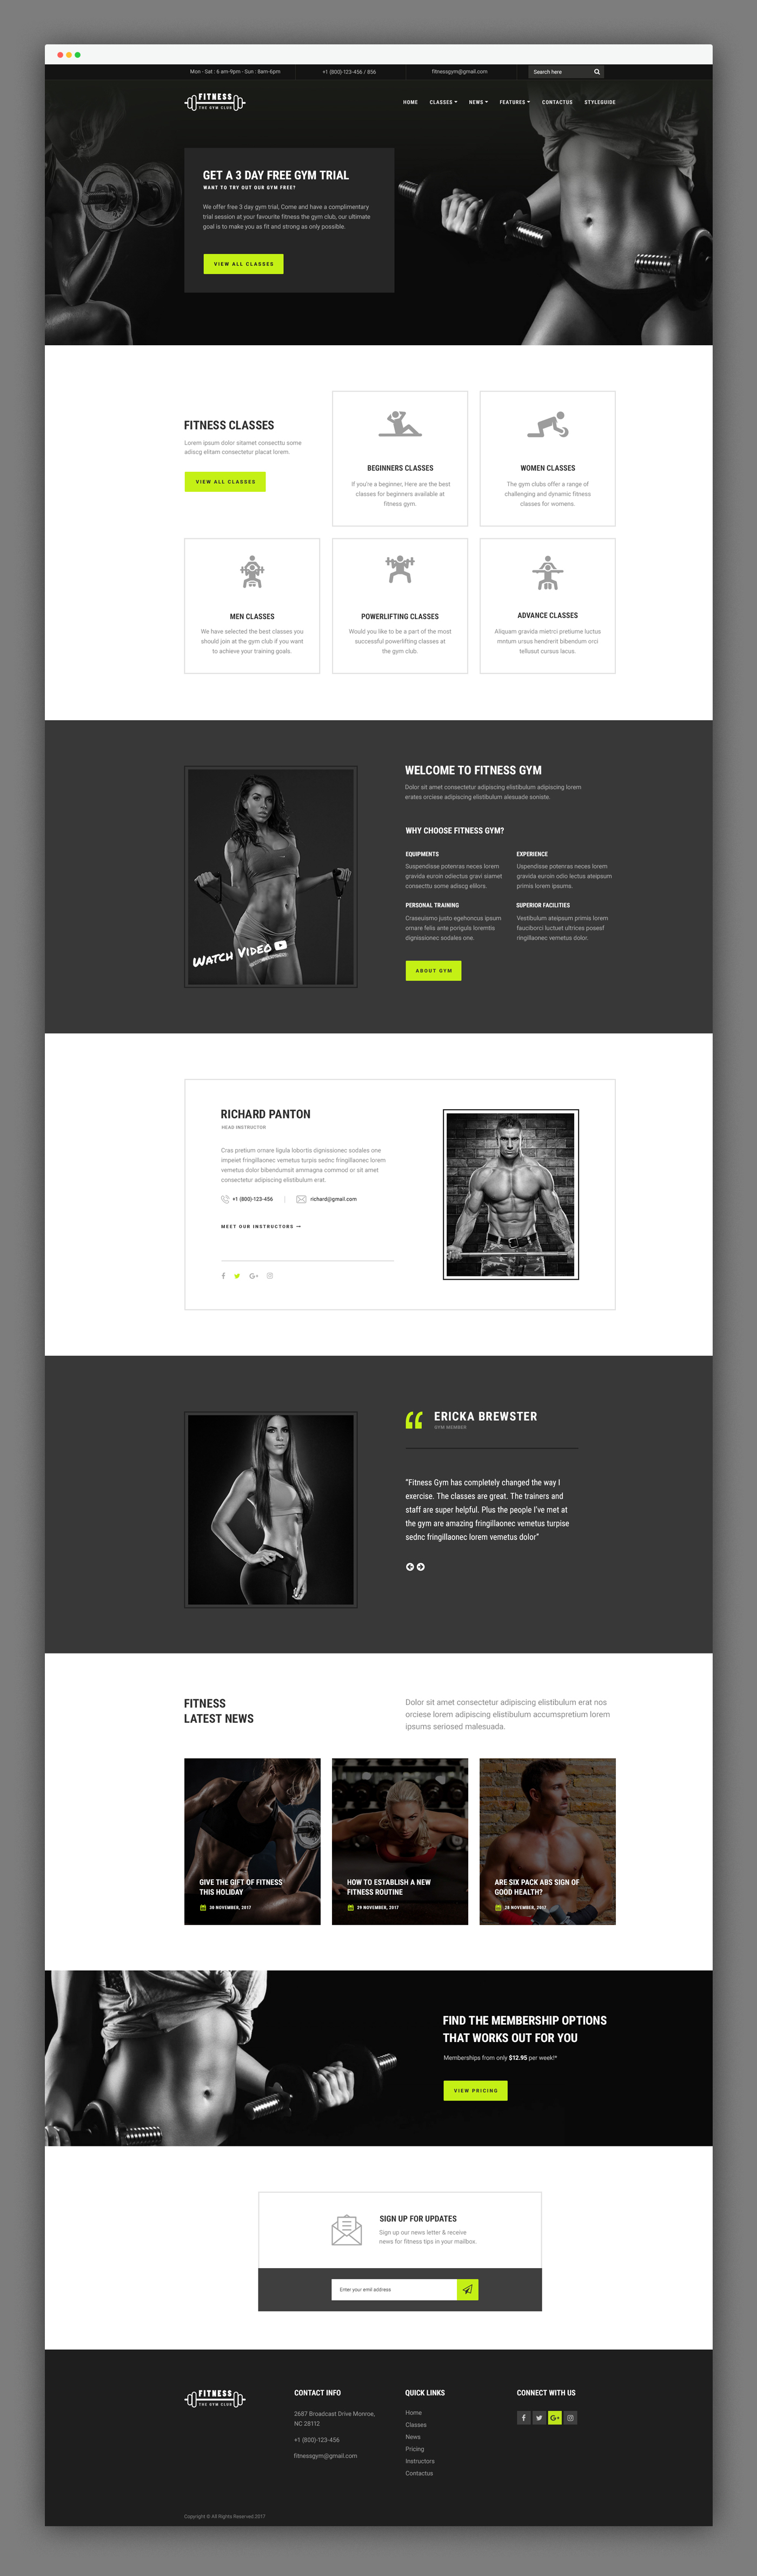 fitness-gym-responsive-website-template-free-download-on-behance